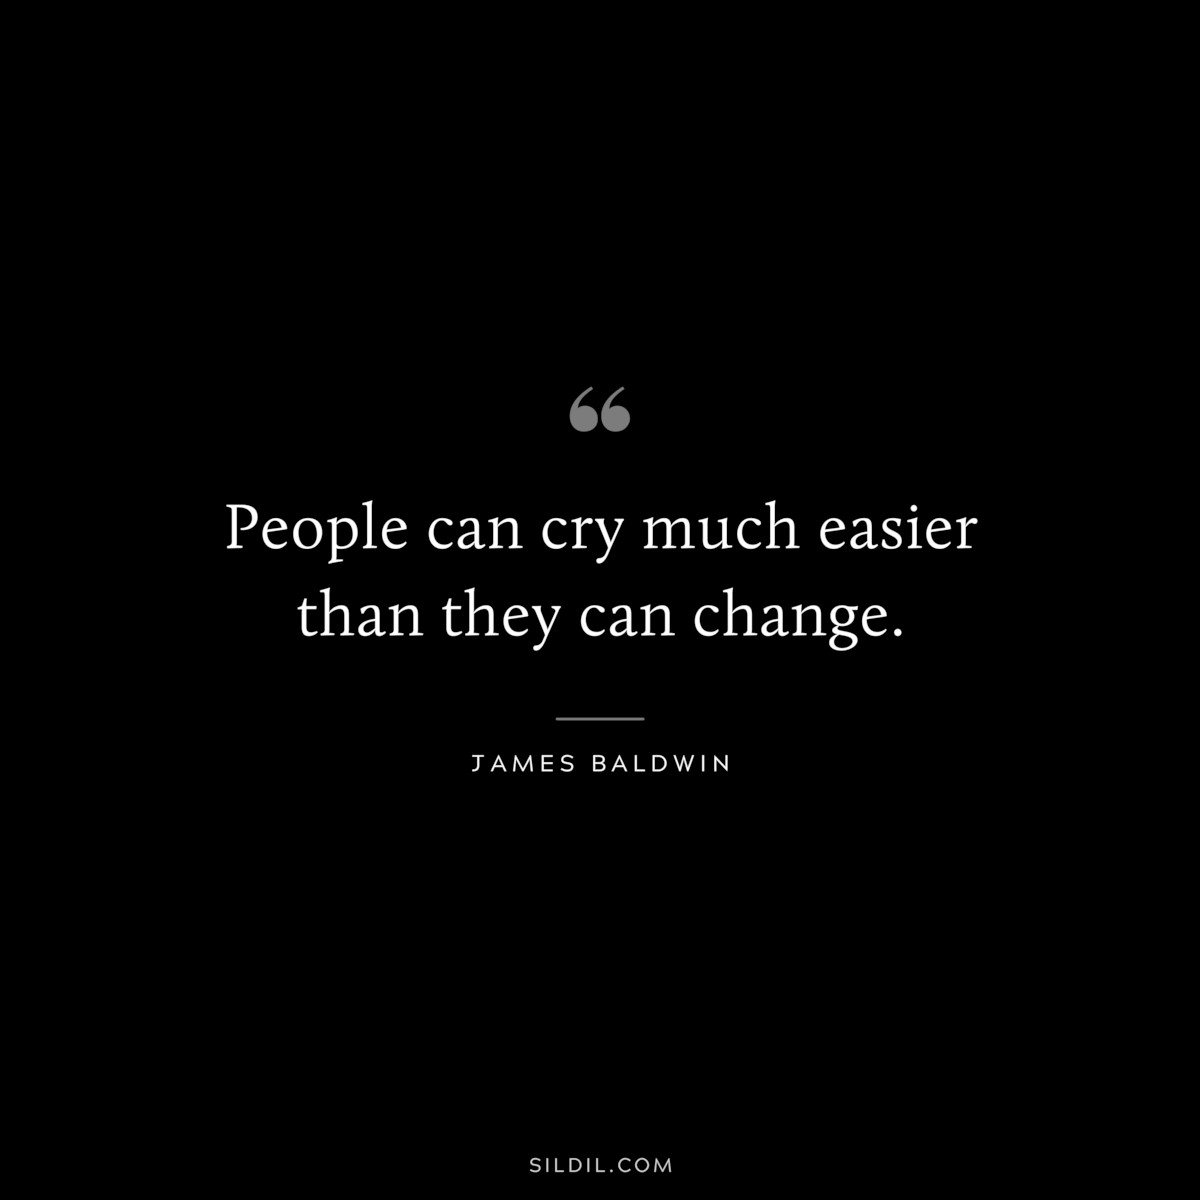 People can cry much easier than they can change. ― James Baldwin